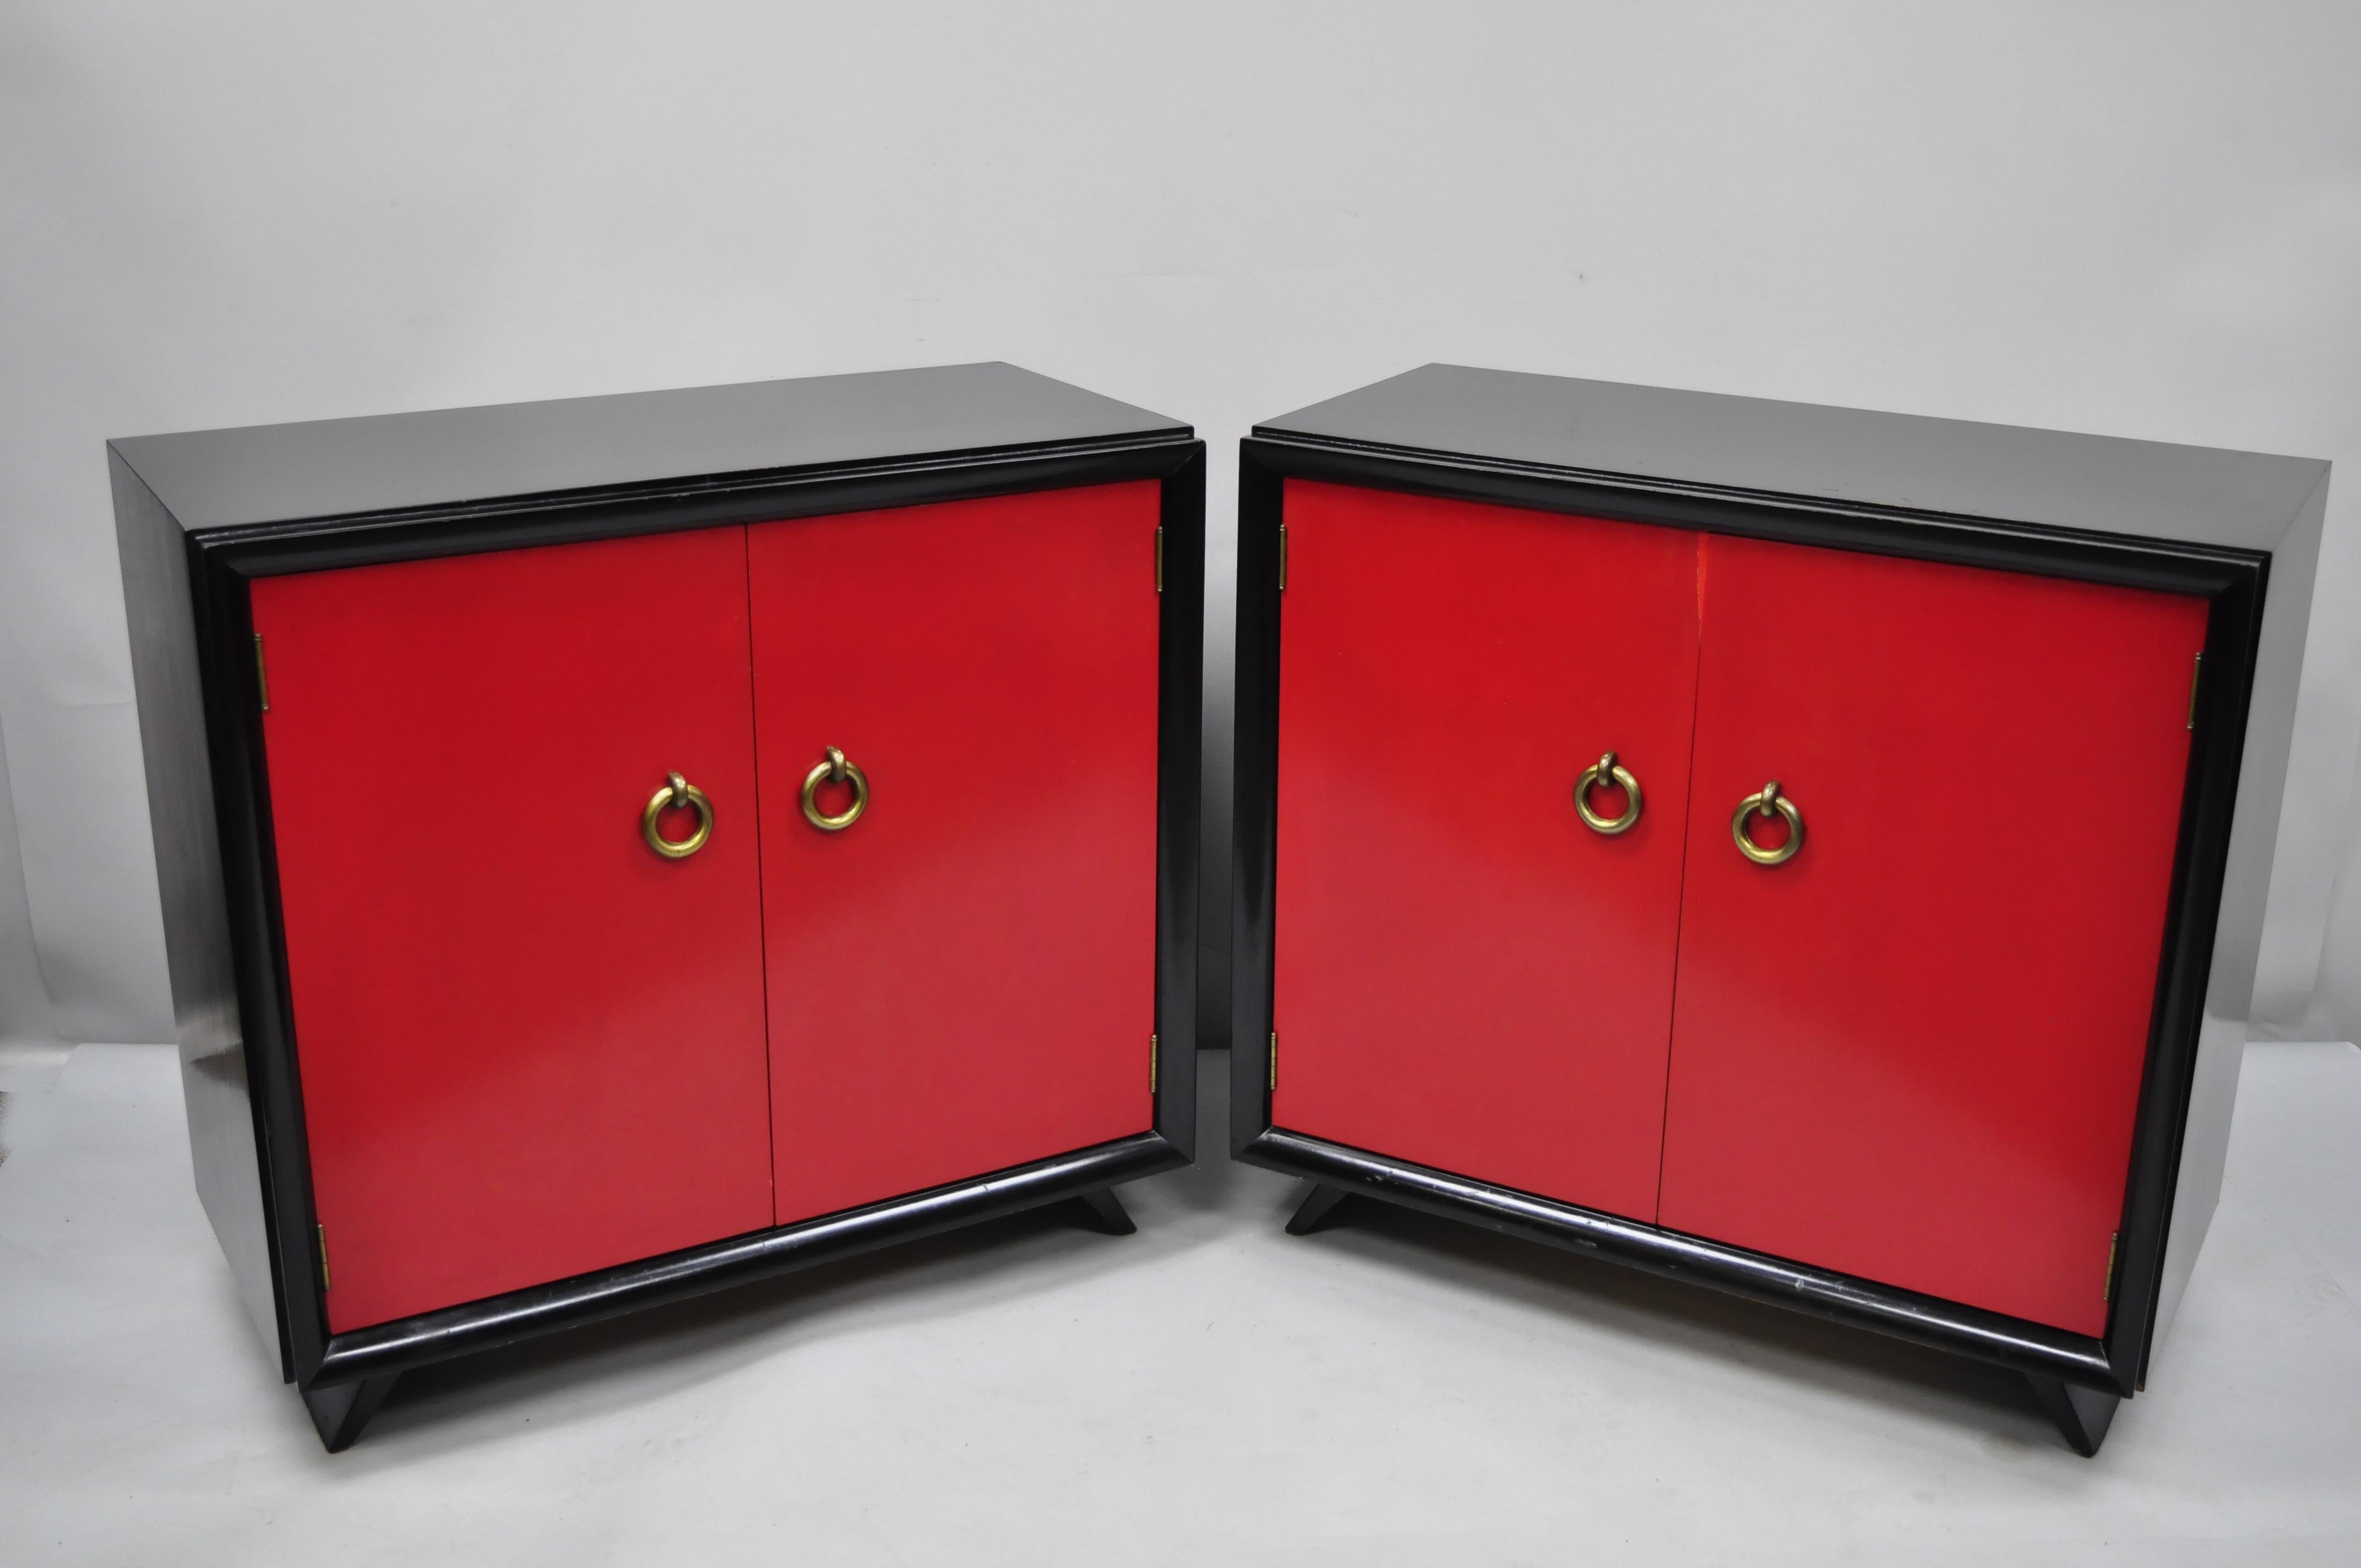 Pair of red and black Art Deco Mid-Century Modern cabinet commodes by Harjer. Item features black and red lacquer finish, 2 swing doors, 1 adjustable shelves, tapered legs, solid brass hardware, clean modernist lines, quality American craftsmanship,